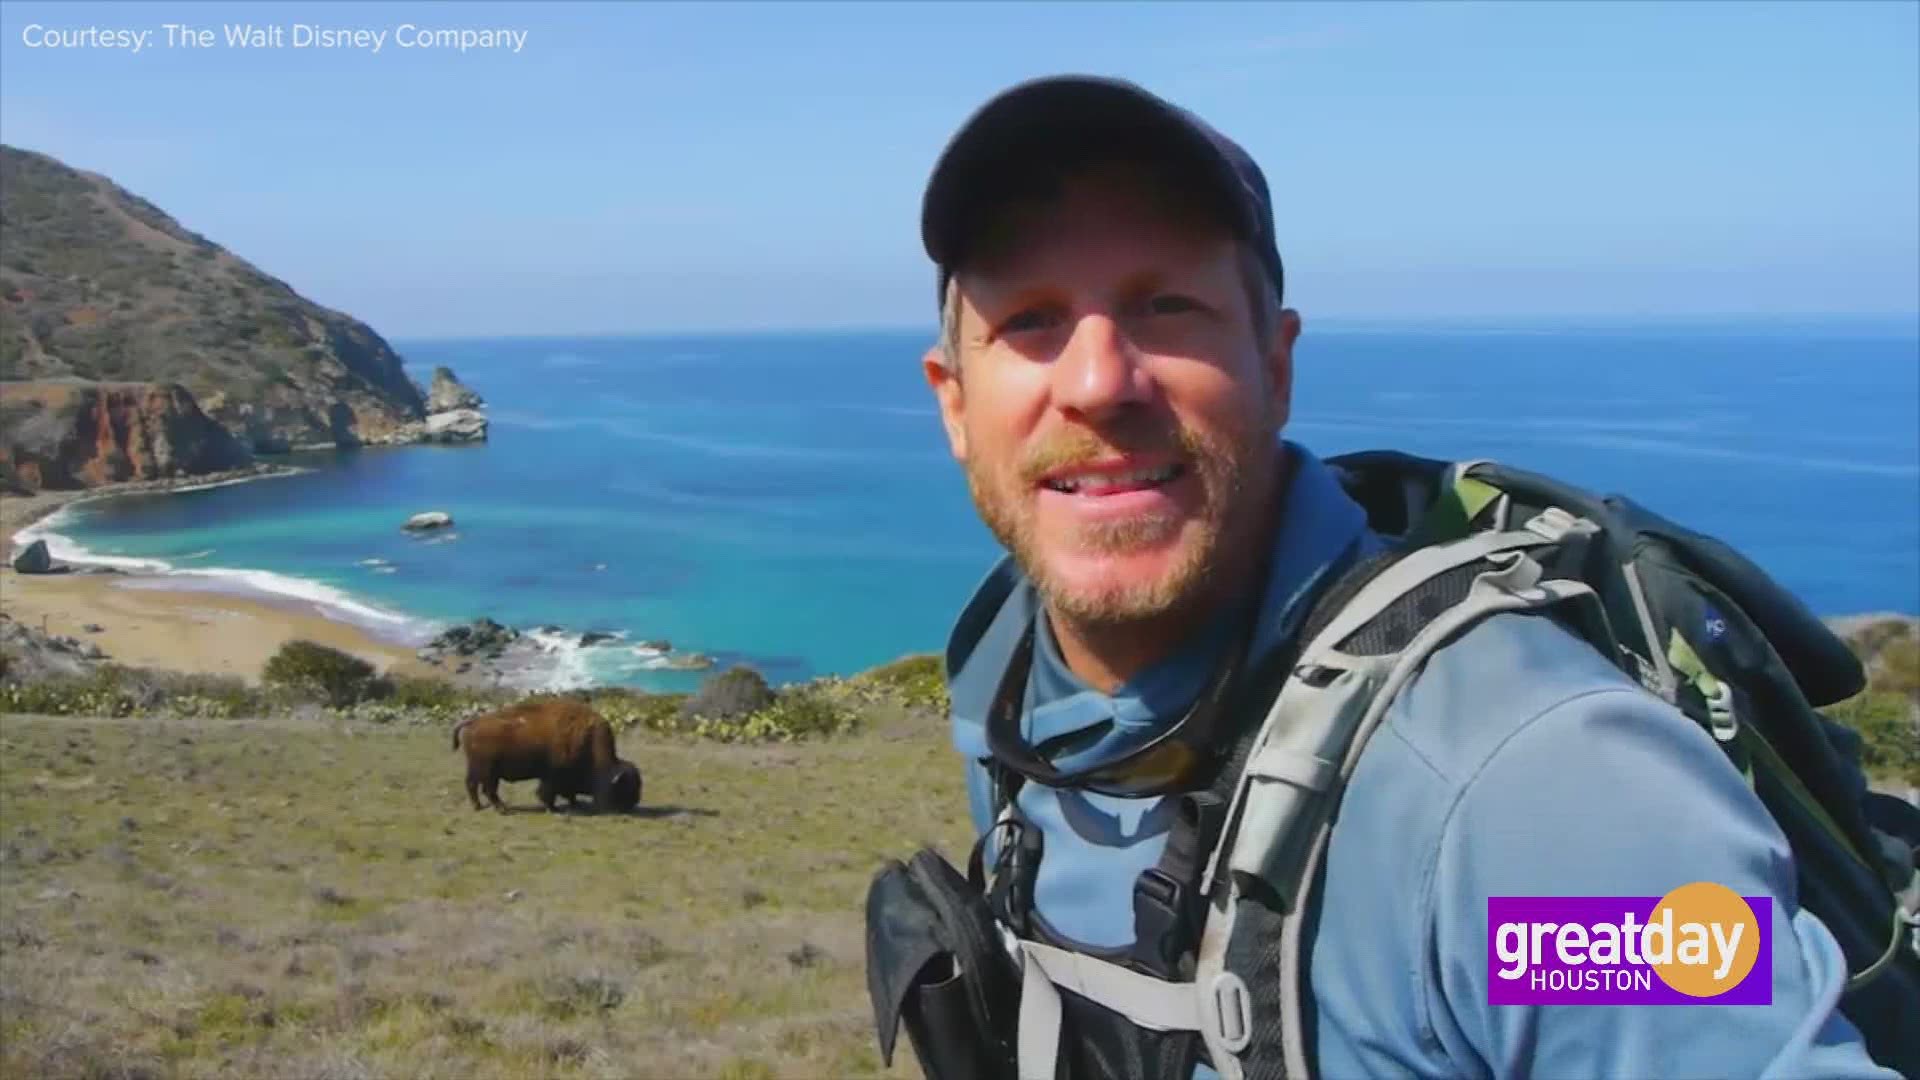 Professional explorer Greg Aiello speaks to the beauty and unpredictability of nature.